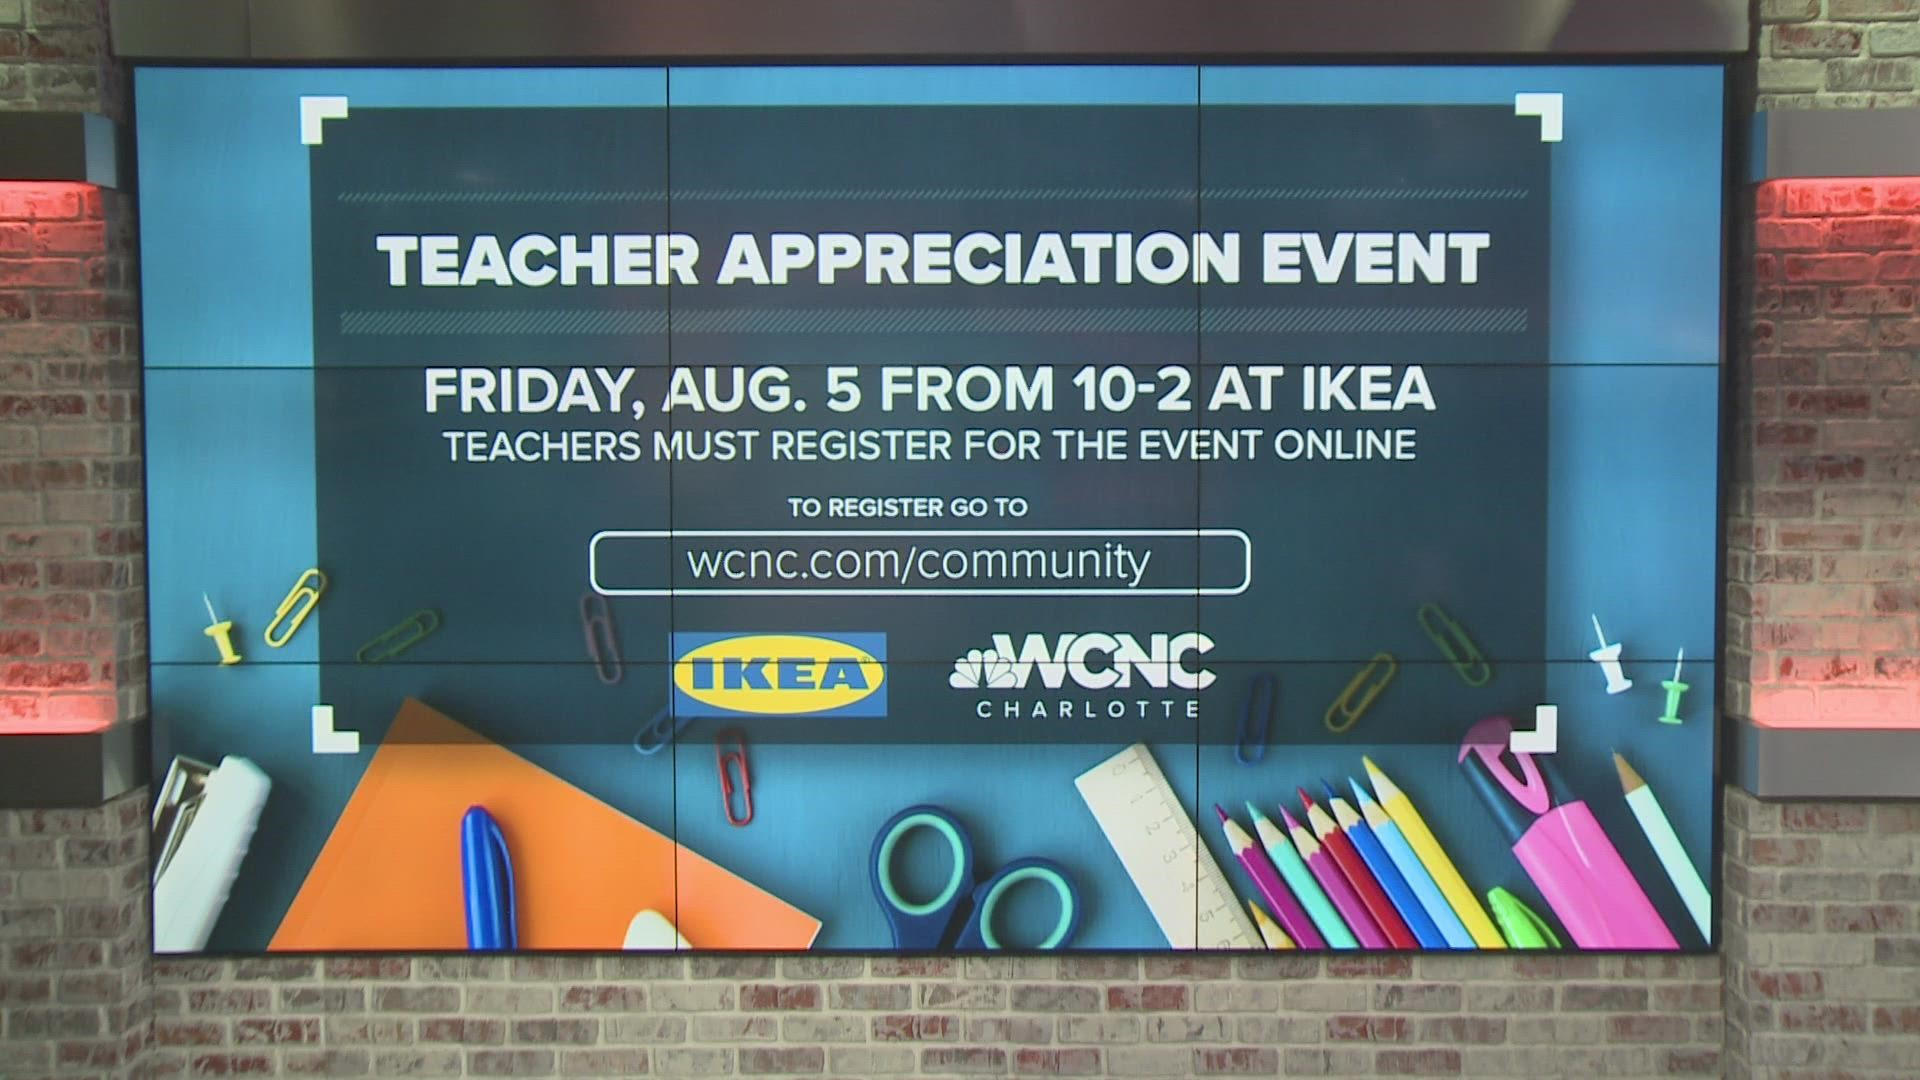 Online registration is now open for WCNC's teacher appreciation event at Ikea on Friday